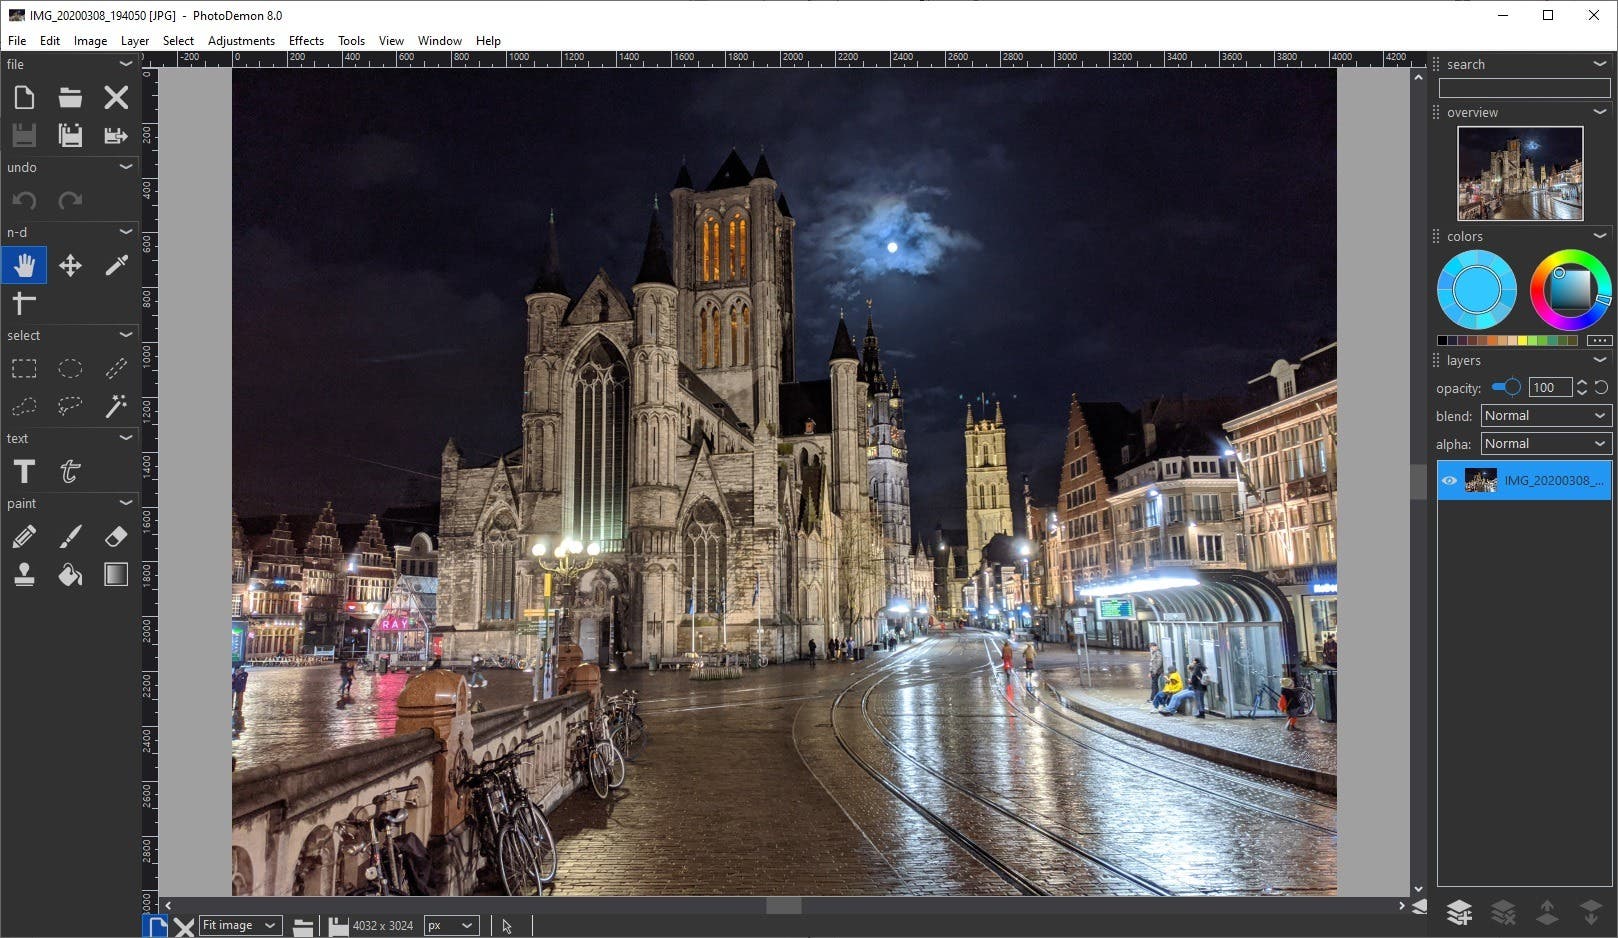 PhotoDemon is a powerful open-source photo editor for Windows